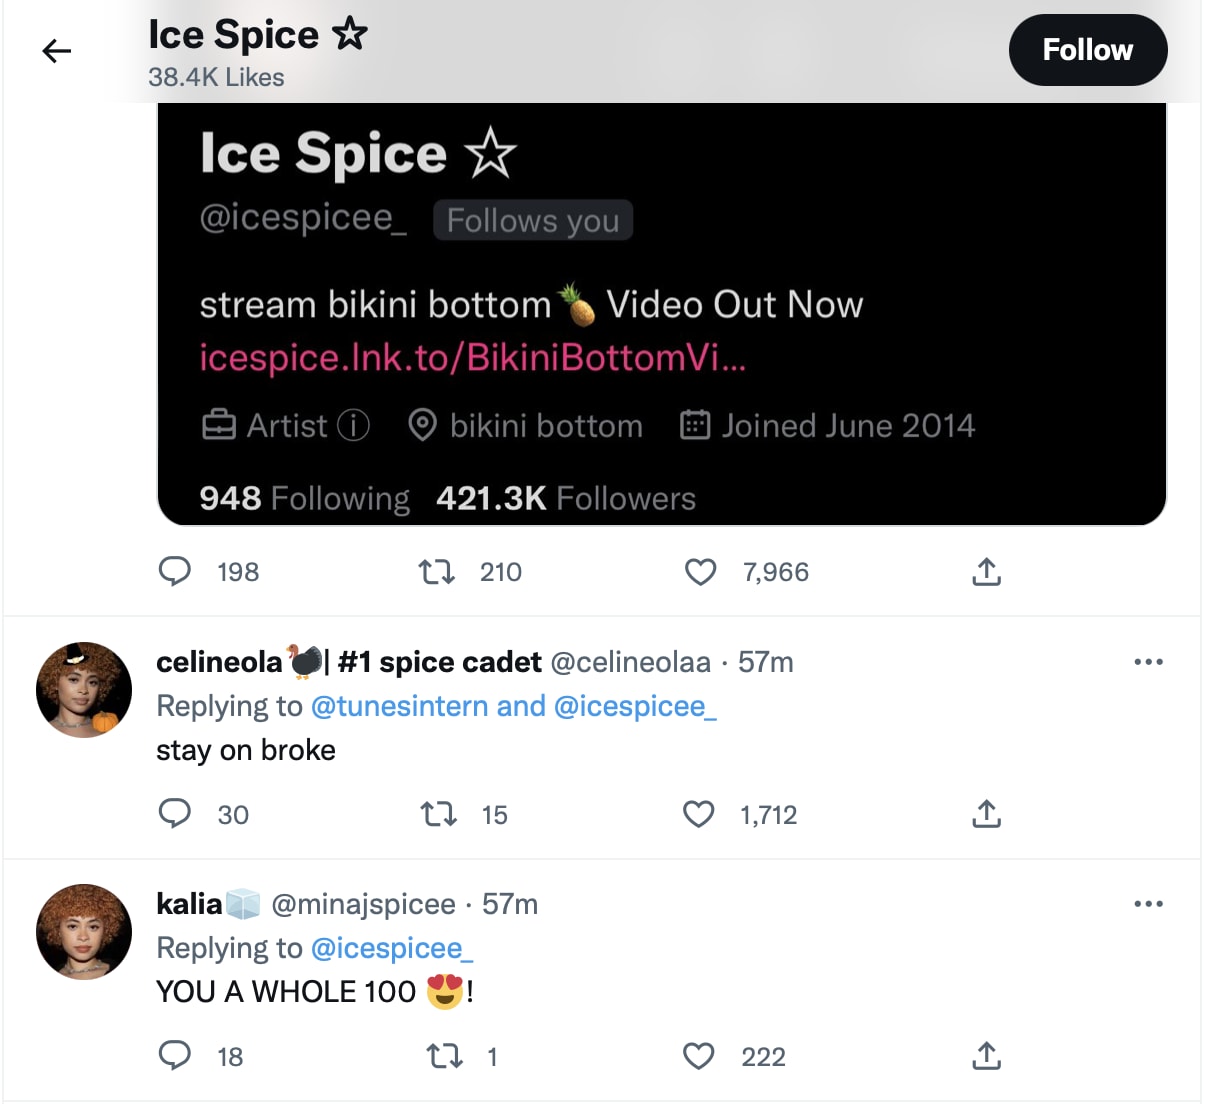 This is a photo of Ice Spice.